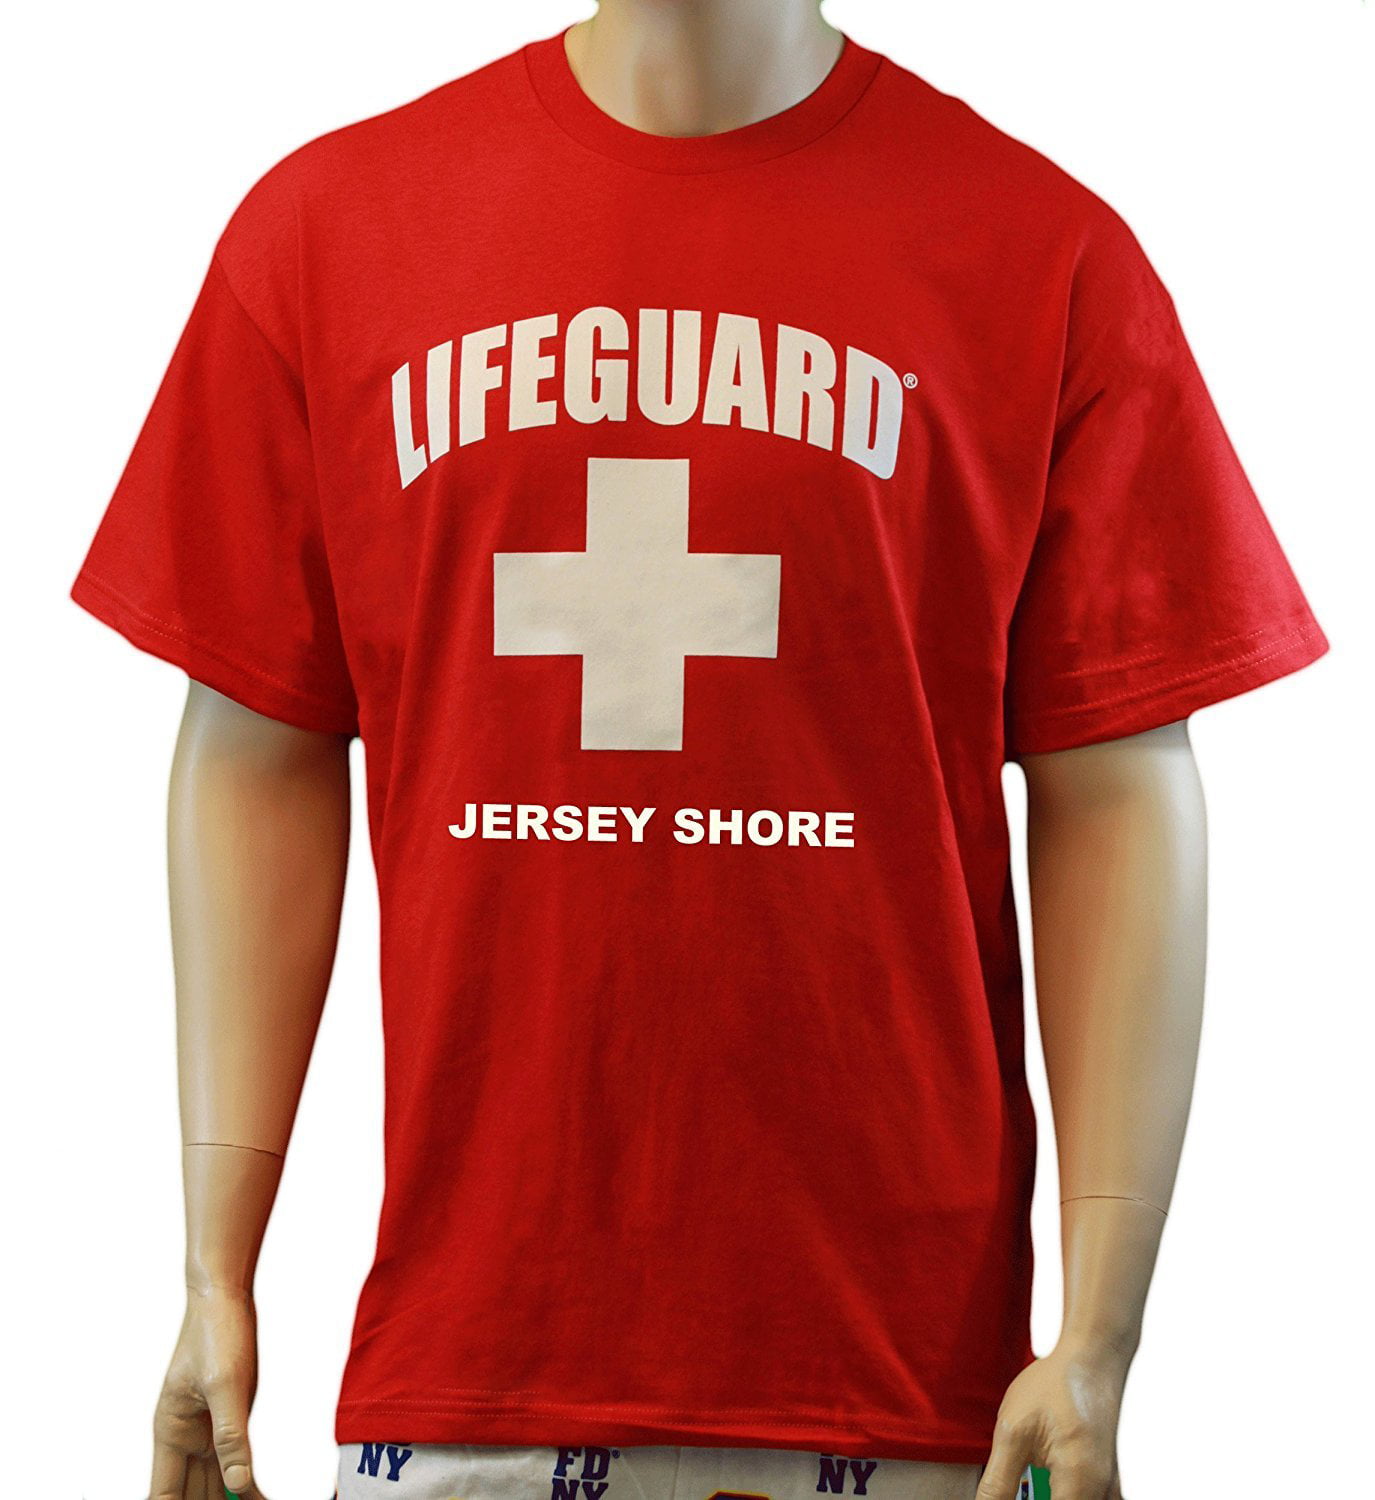 T-Shirt Jersey Shore Official Licensed Life Guard Tee Large Walmart.com